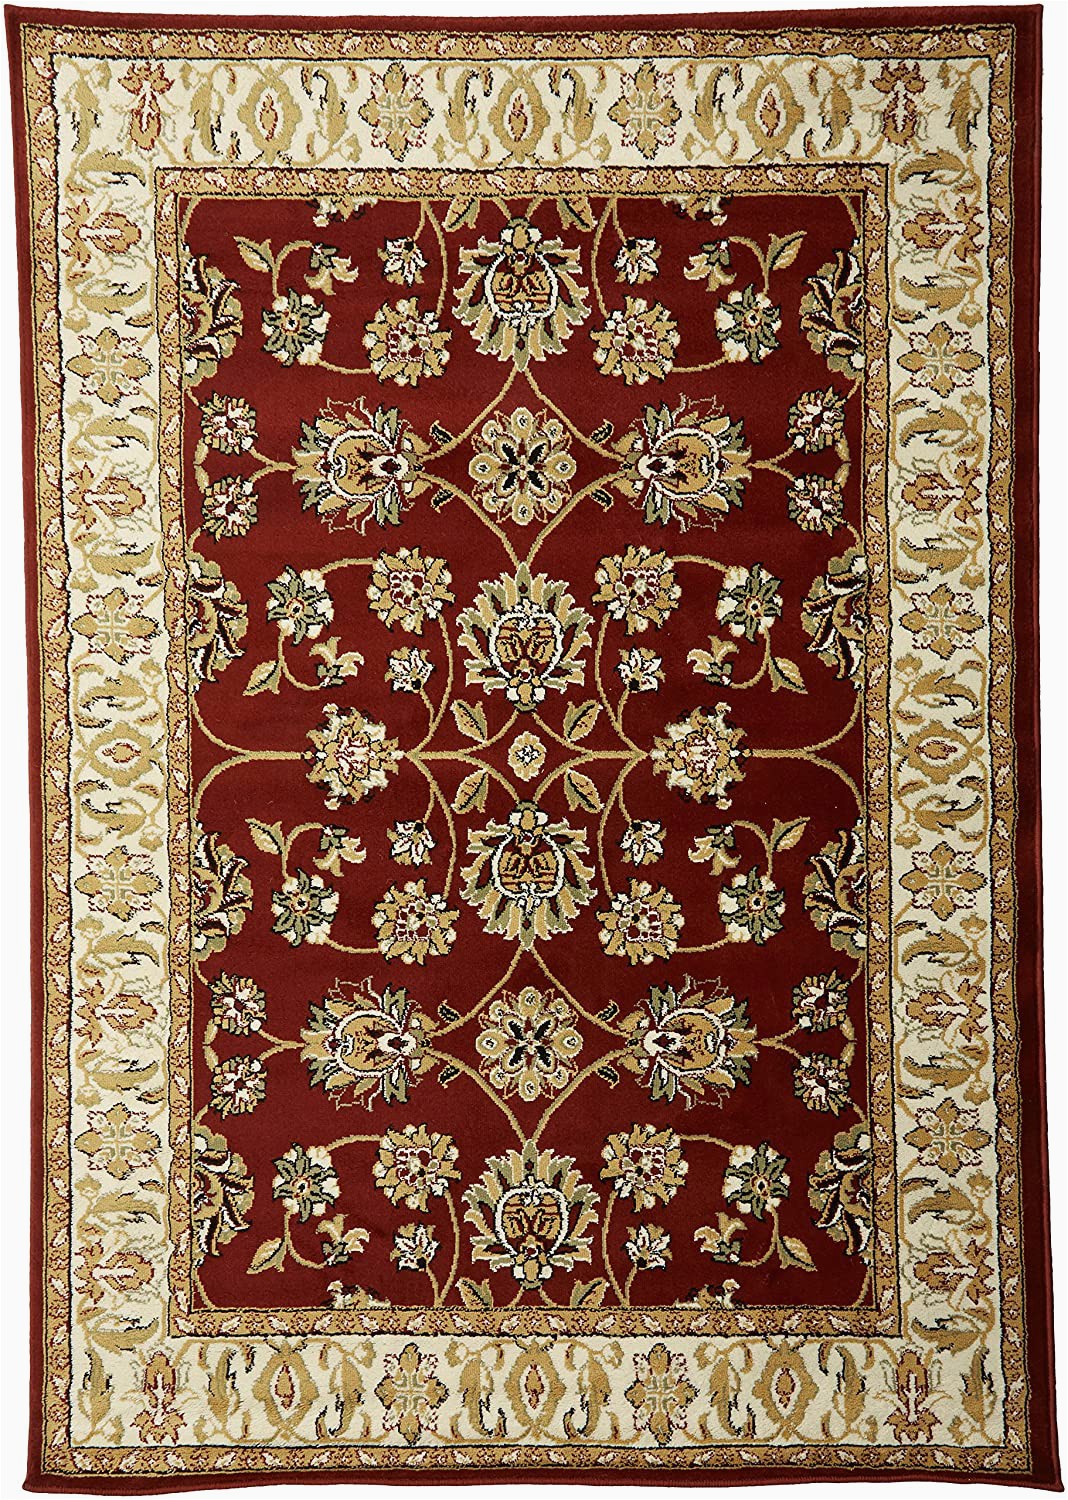 Cheap area Rugs Under 50 Red area Rugs for Living Room area Rugs 5×7 Under 50